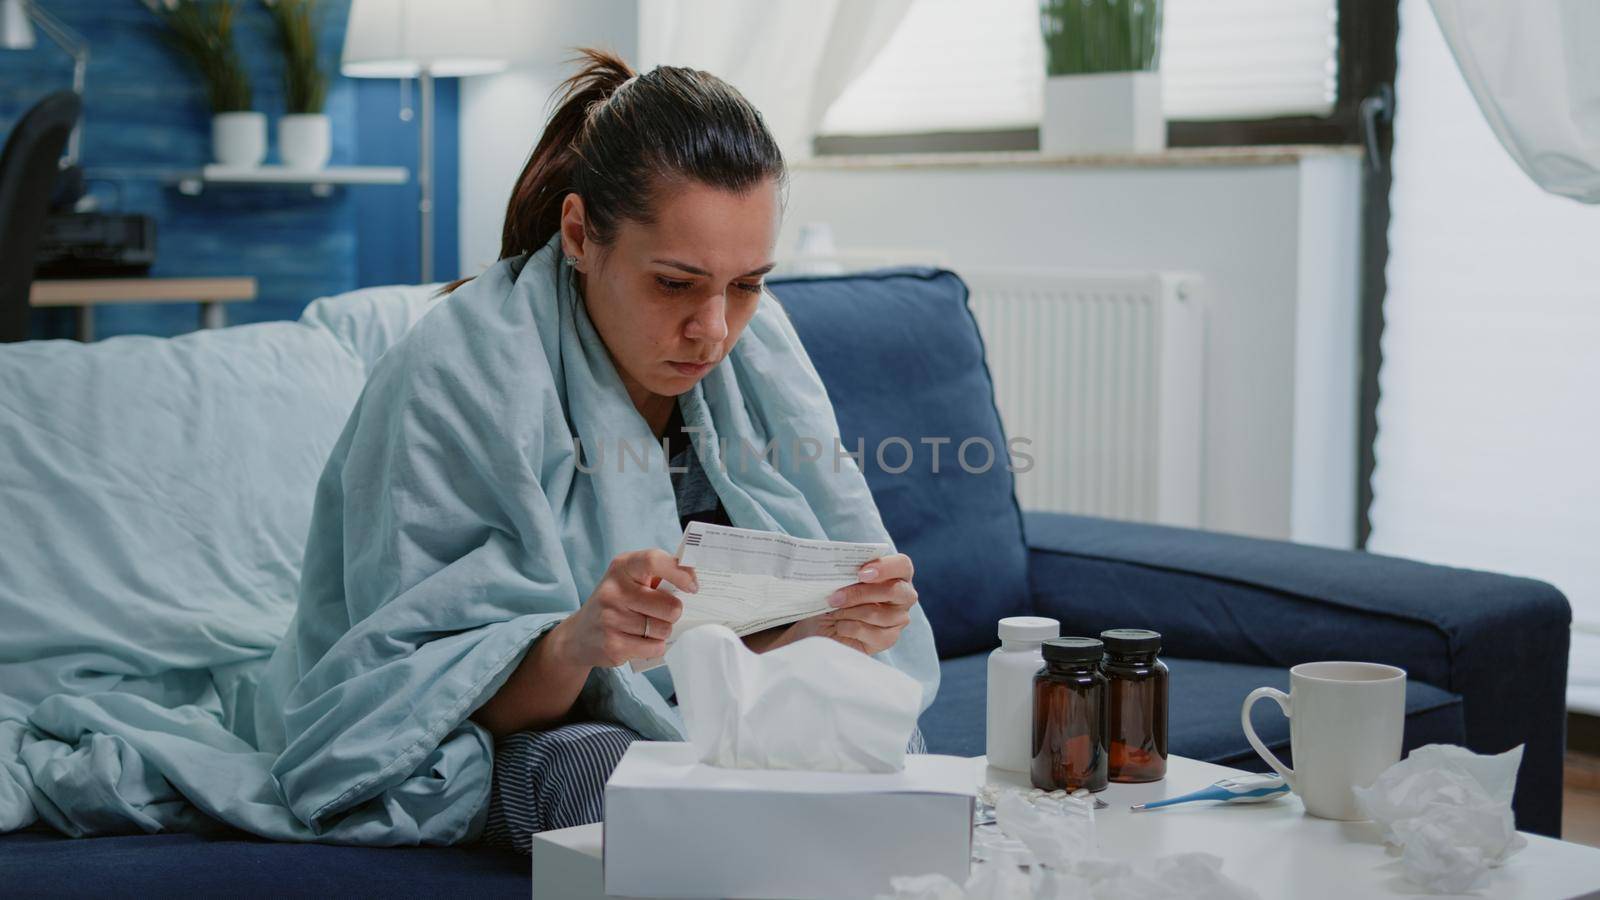 Person with disease infection analyzing package leaflet by DCStudio